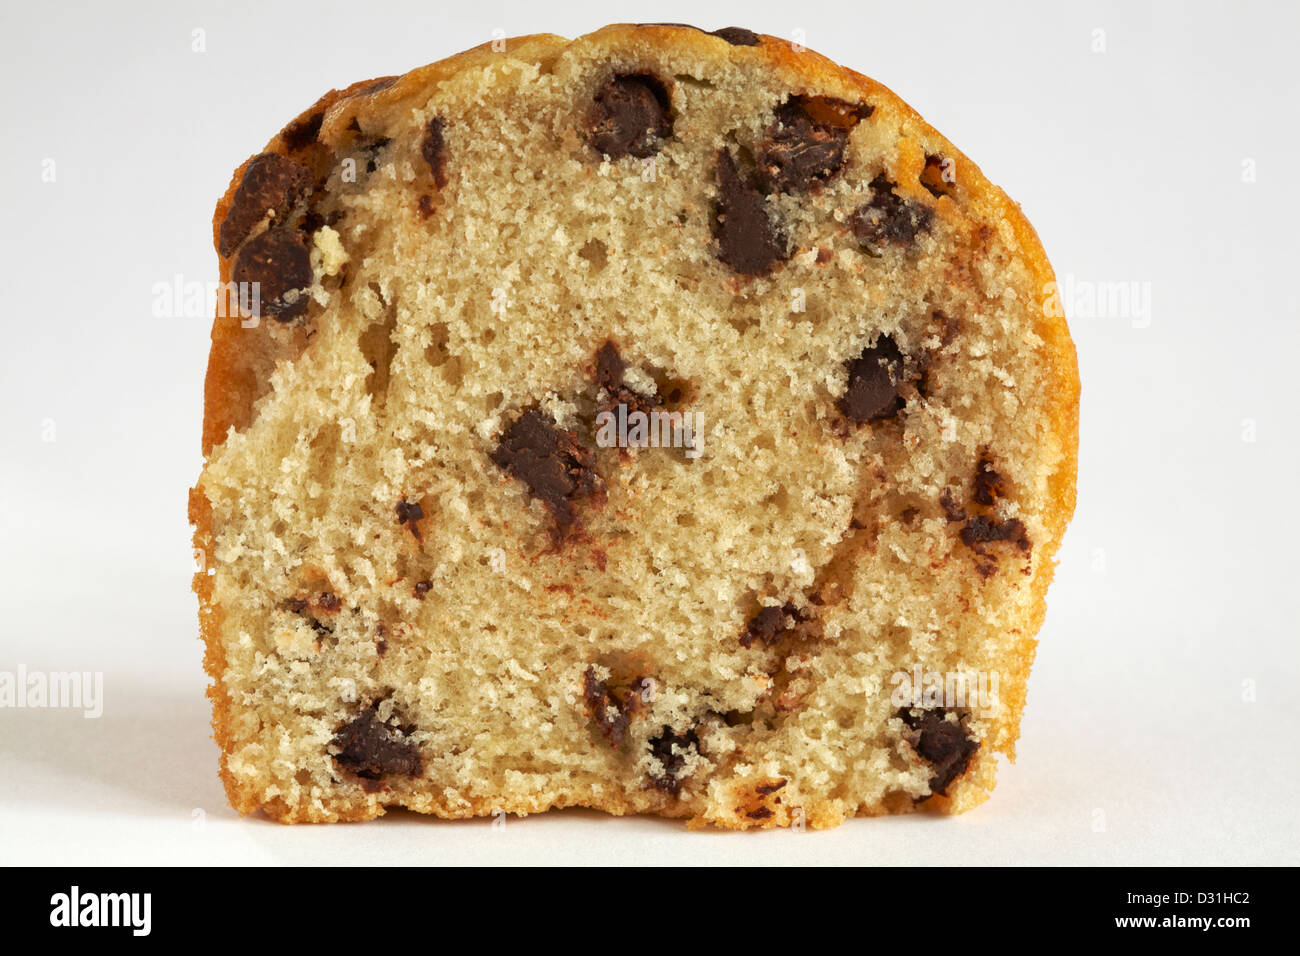 chocolate chip muffin cut in half isolated on white background Stock Photo